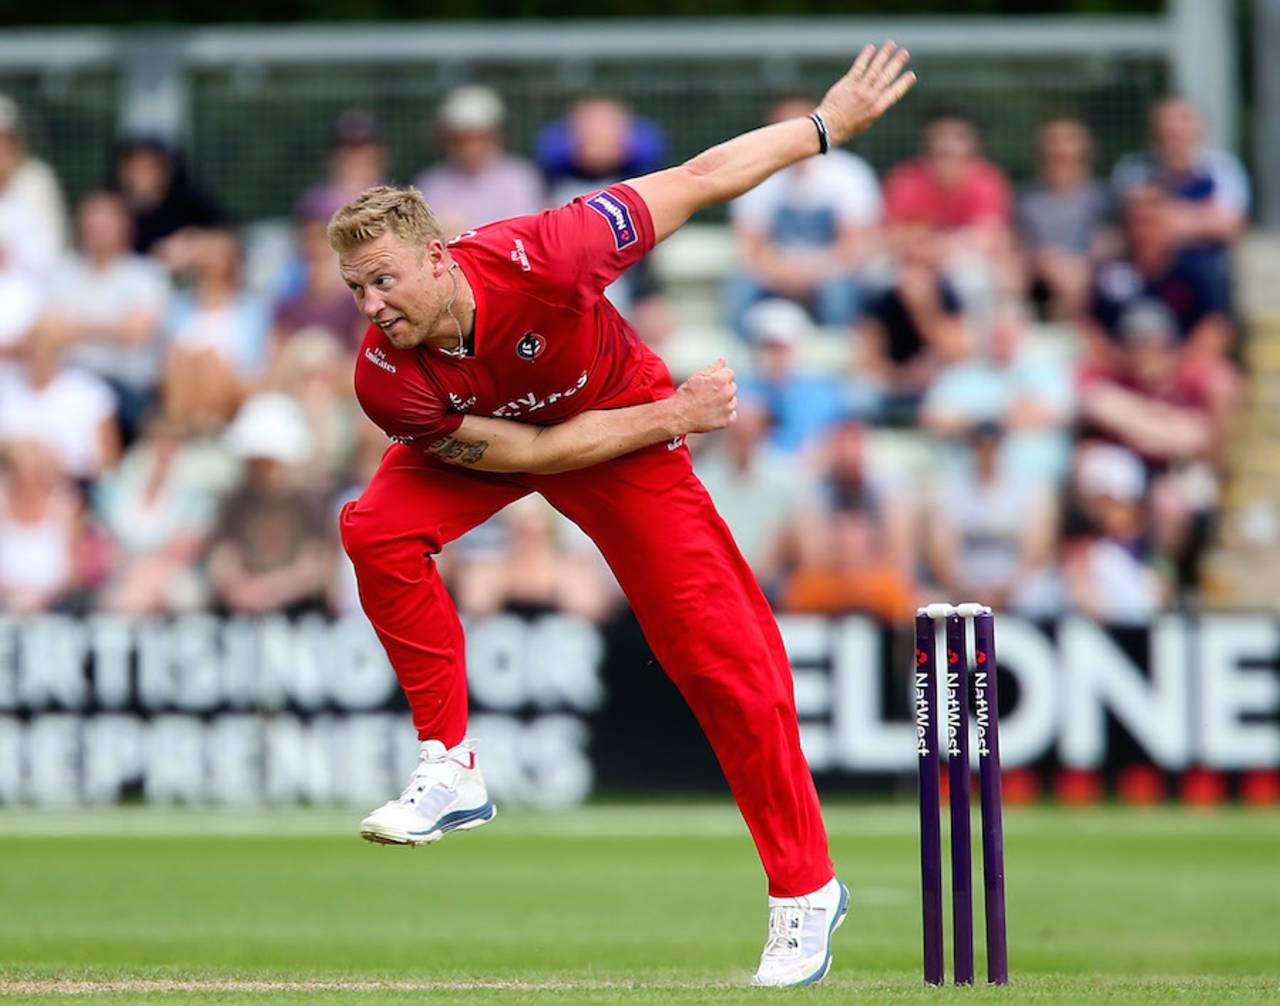 Andrew Flintoff's appearance in the NatWest Blast final looks like his last for Lancashire&nbsp;&nbsp;&bull;&nbsp;&nbsp;Getty Images